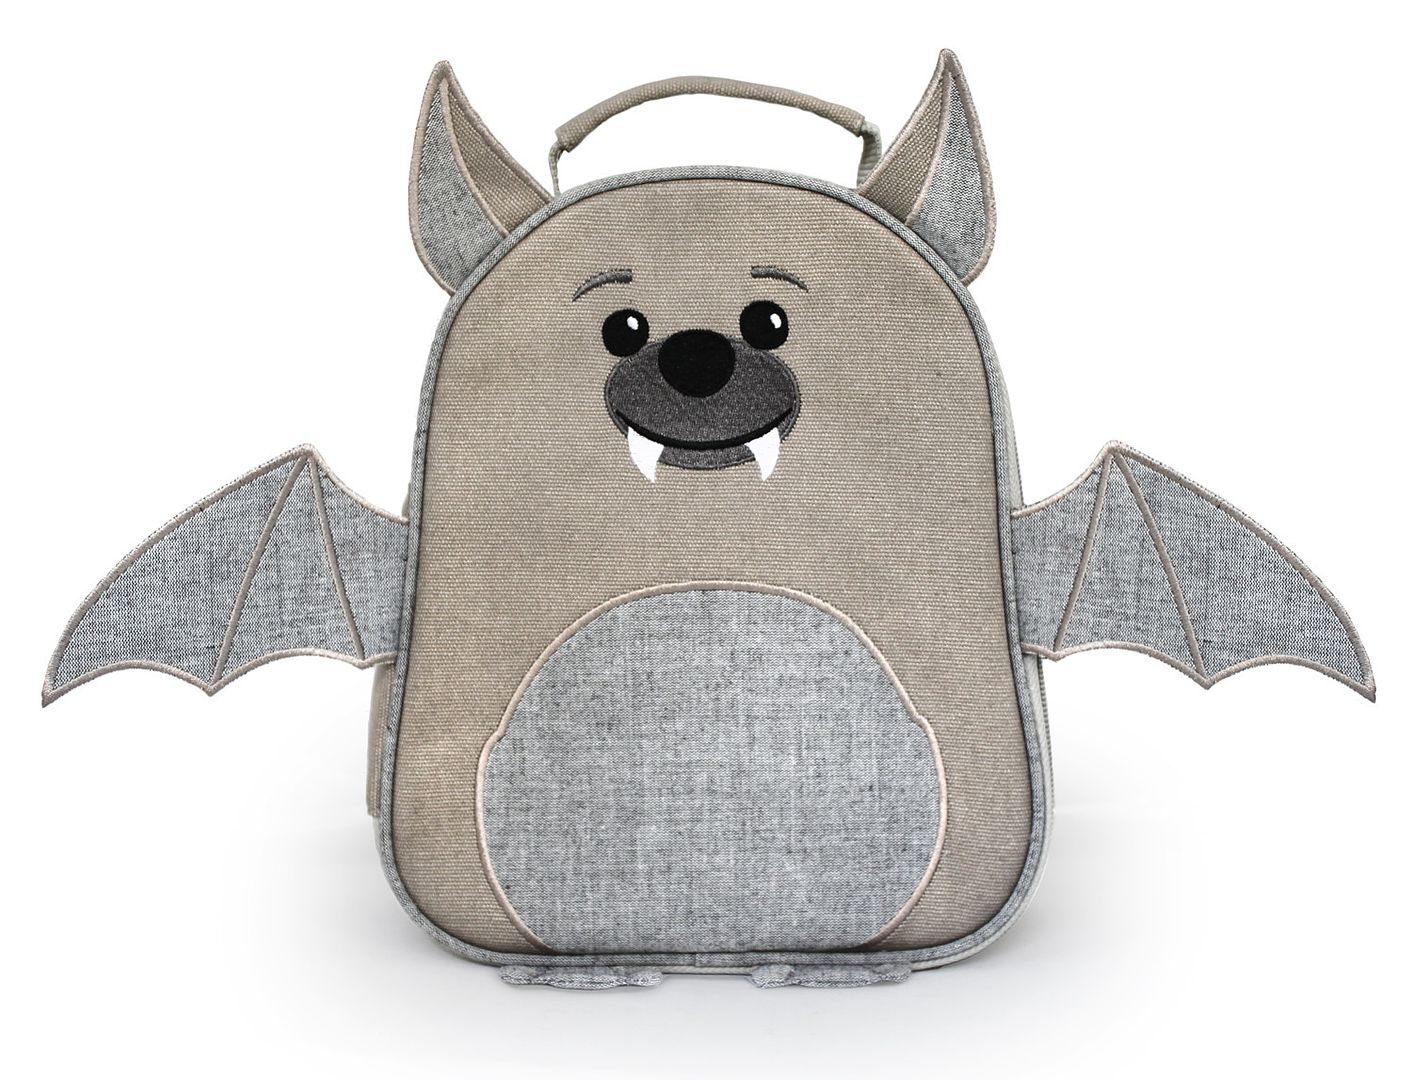 coolest lunchboxes: bat lunchbag from recycled materials